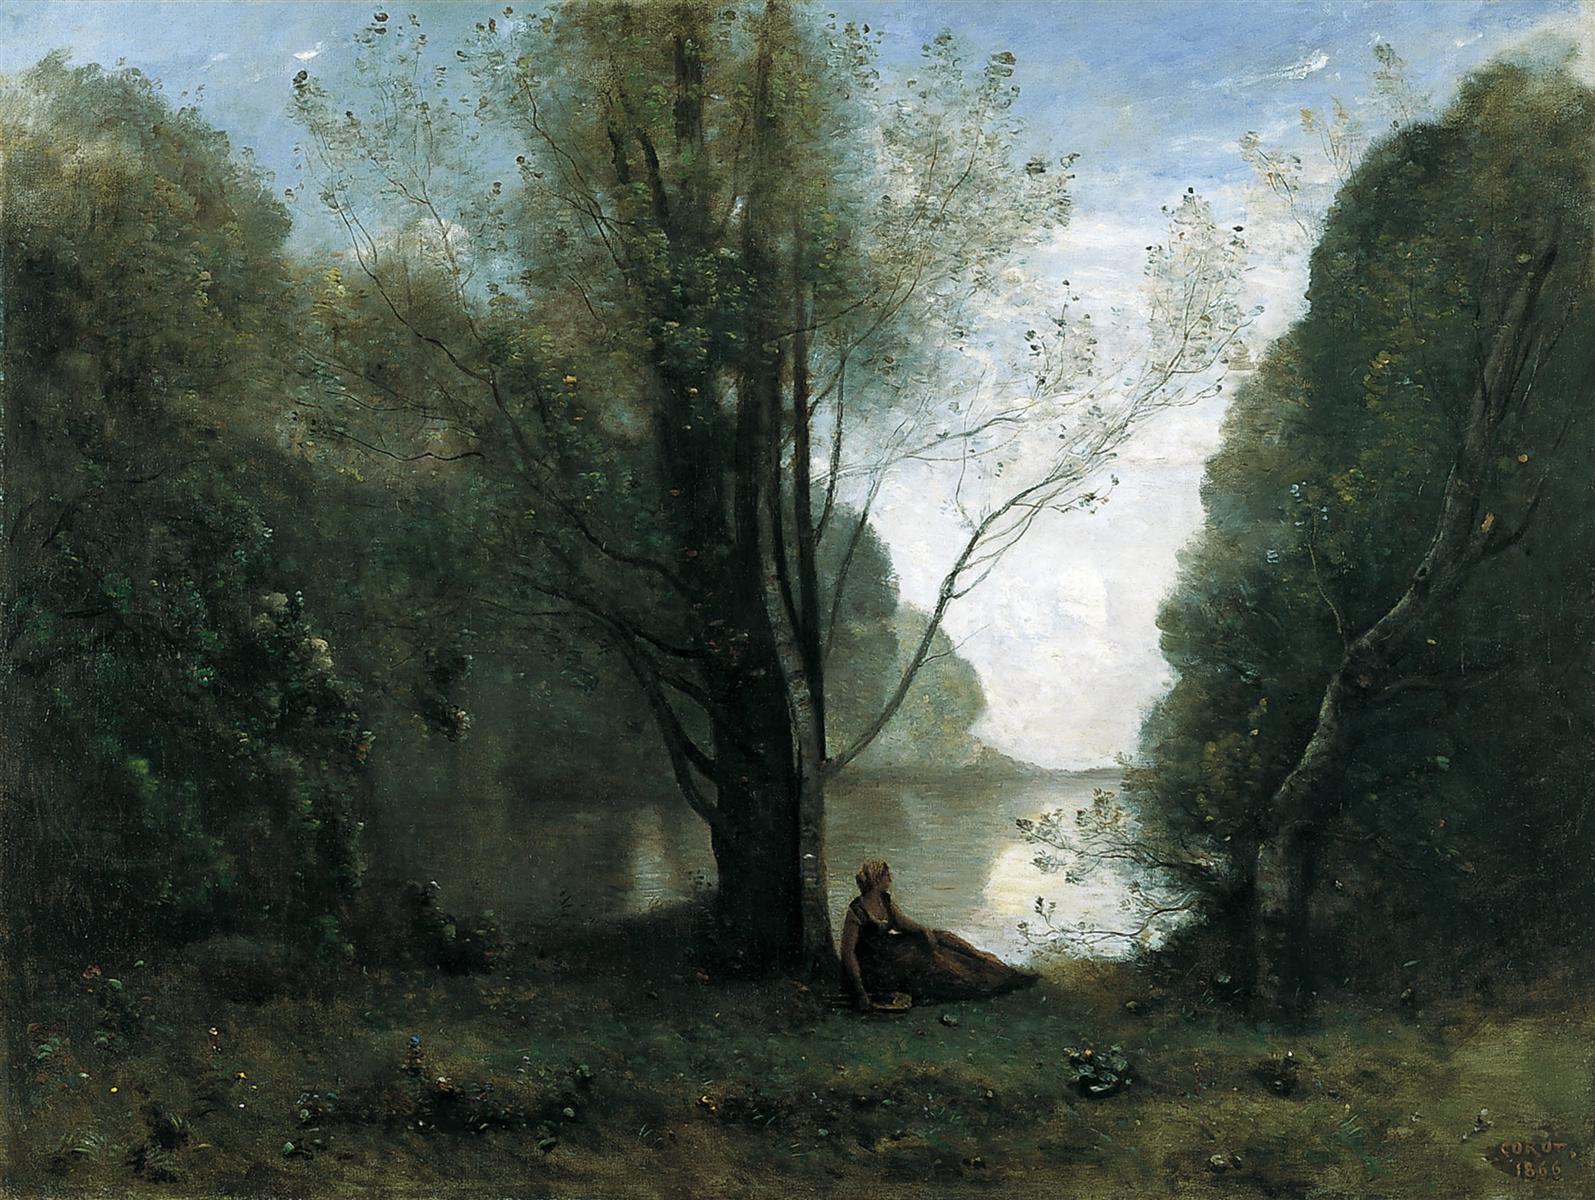 camille-corot-the-solitude-recollection-of-vigen-limousin-1866